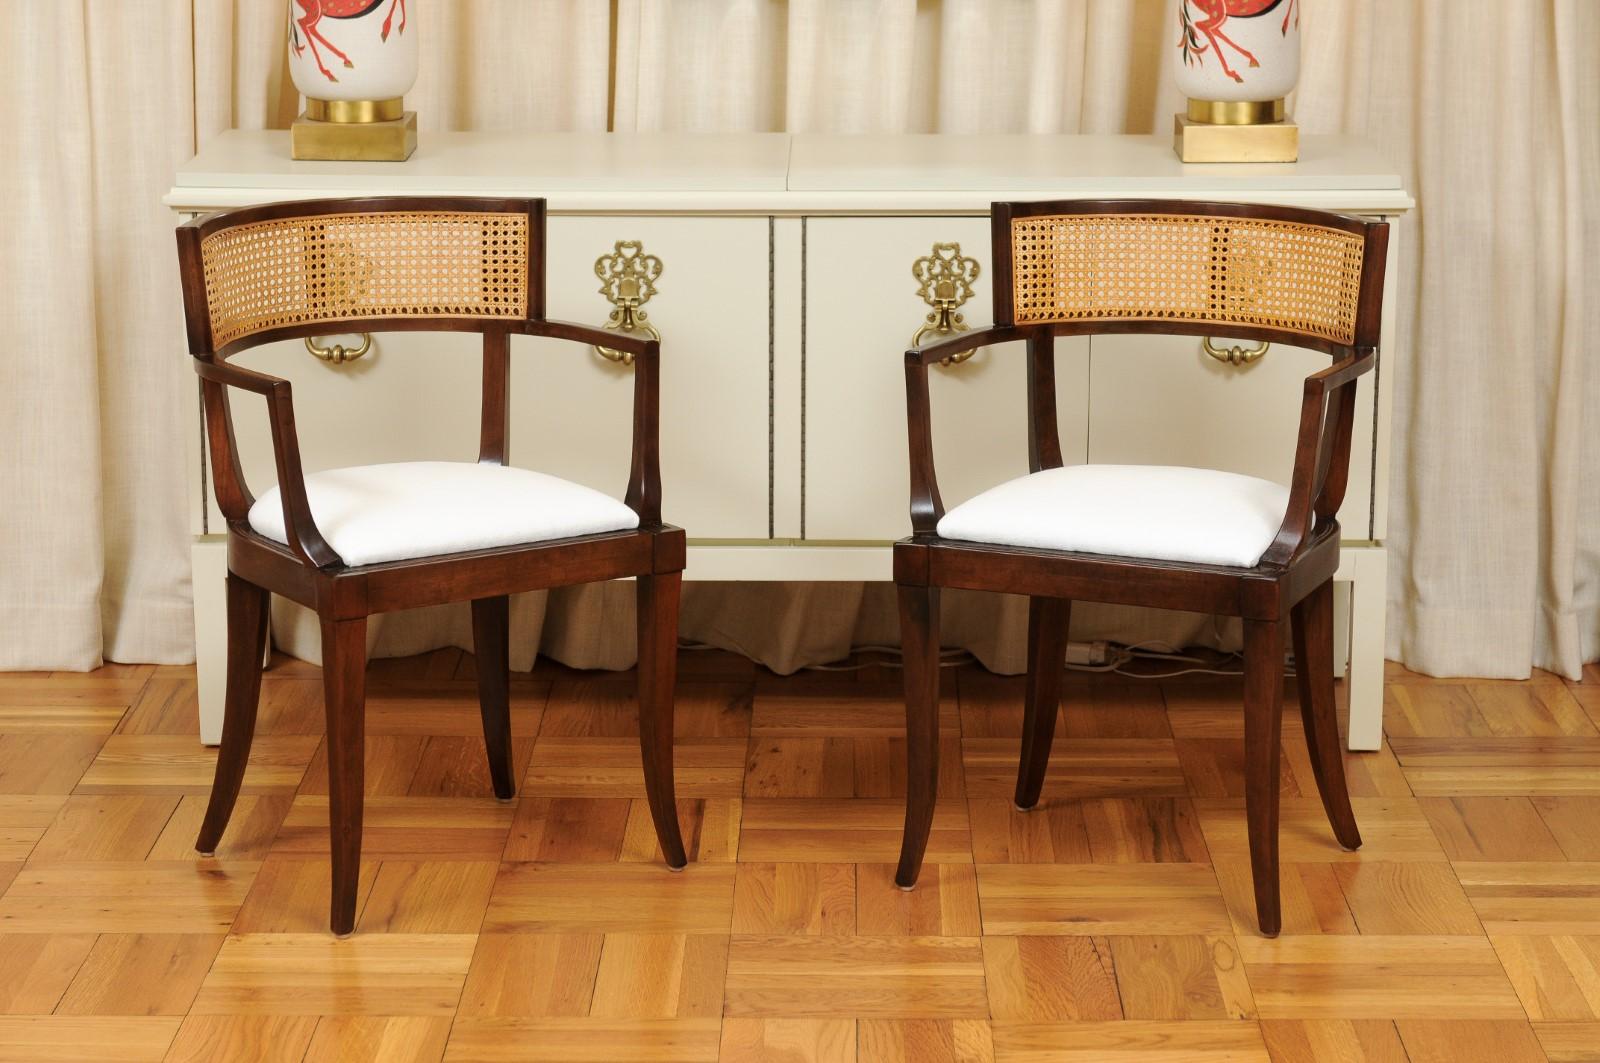 All Arms, Exquisite Set of 20 Klismos Cane Dining Chairs by Baker, circa 1958 For Sale 12